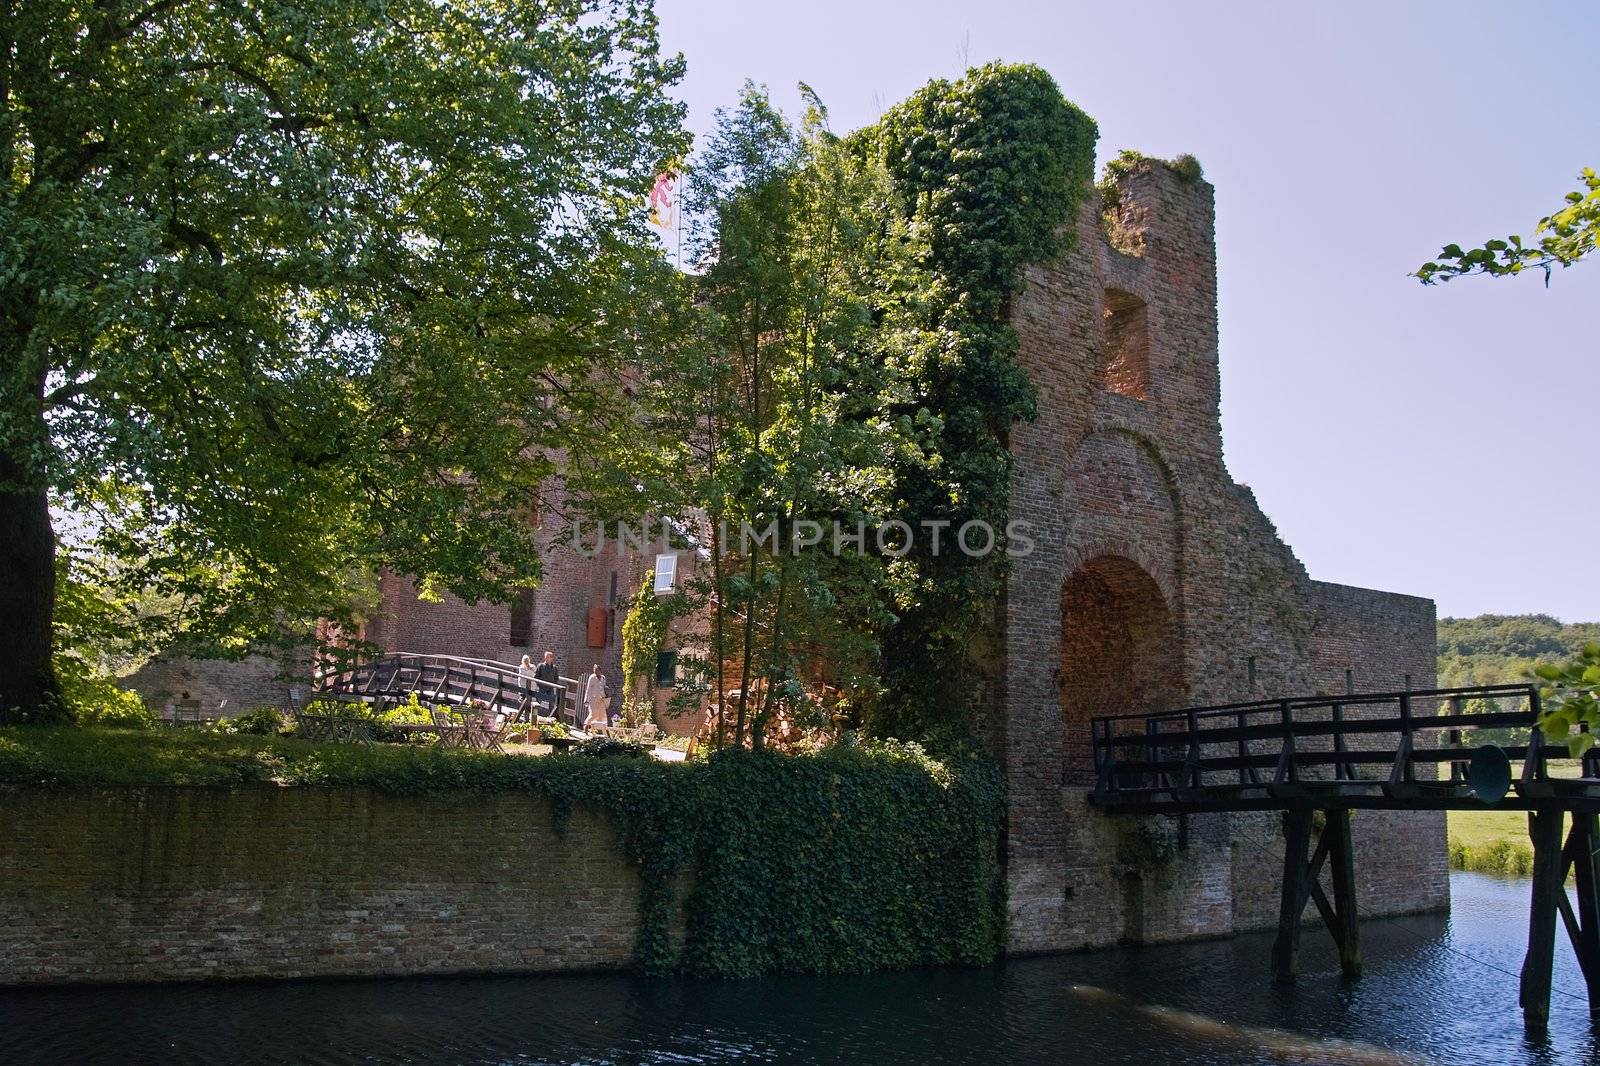 The moat still surrounds the Ruins of Brederode